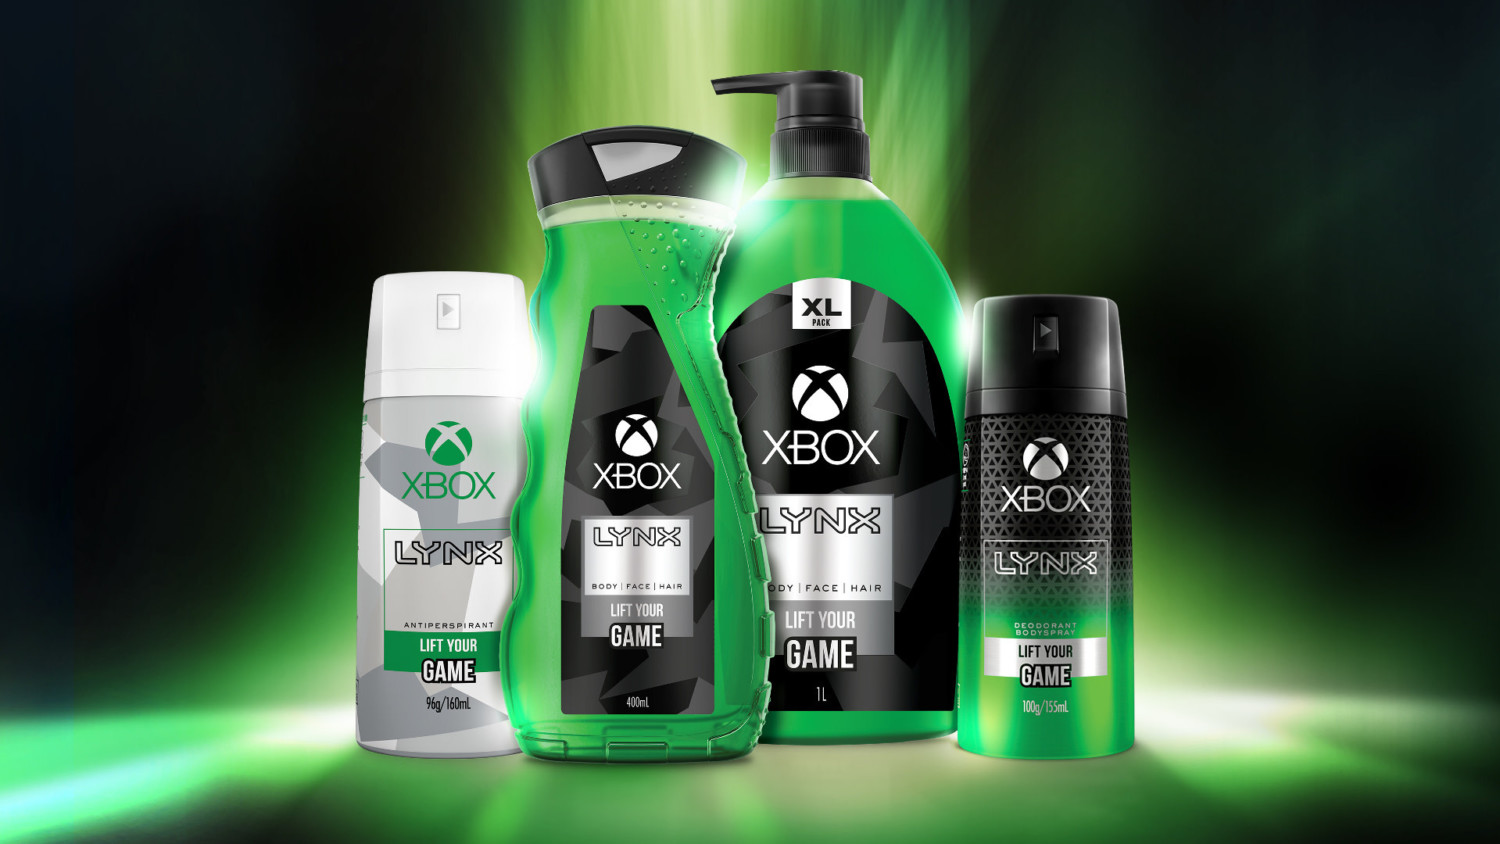 Random Microsoft Is Rolling Out Its Own XboxBrand Soap And Deodorant